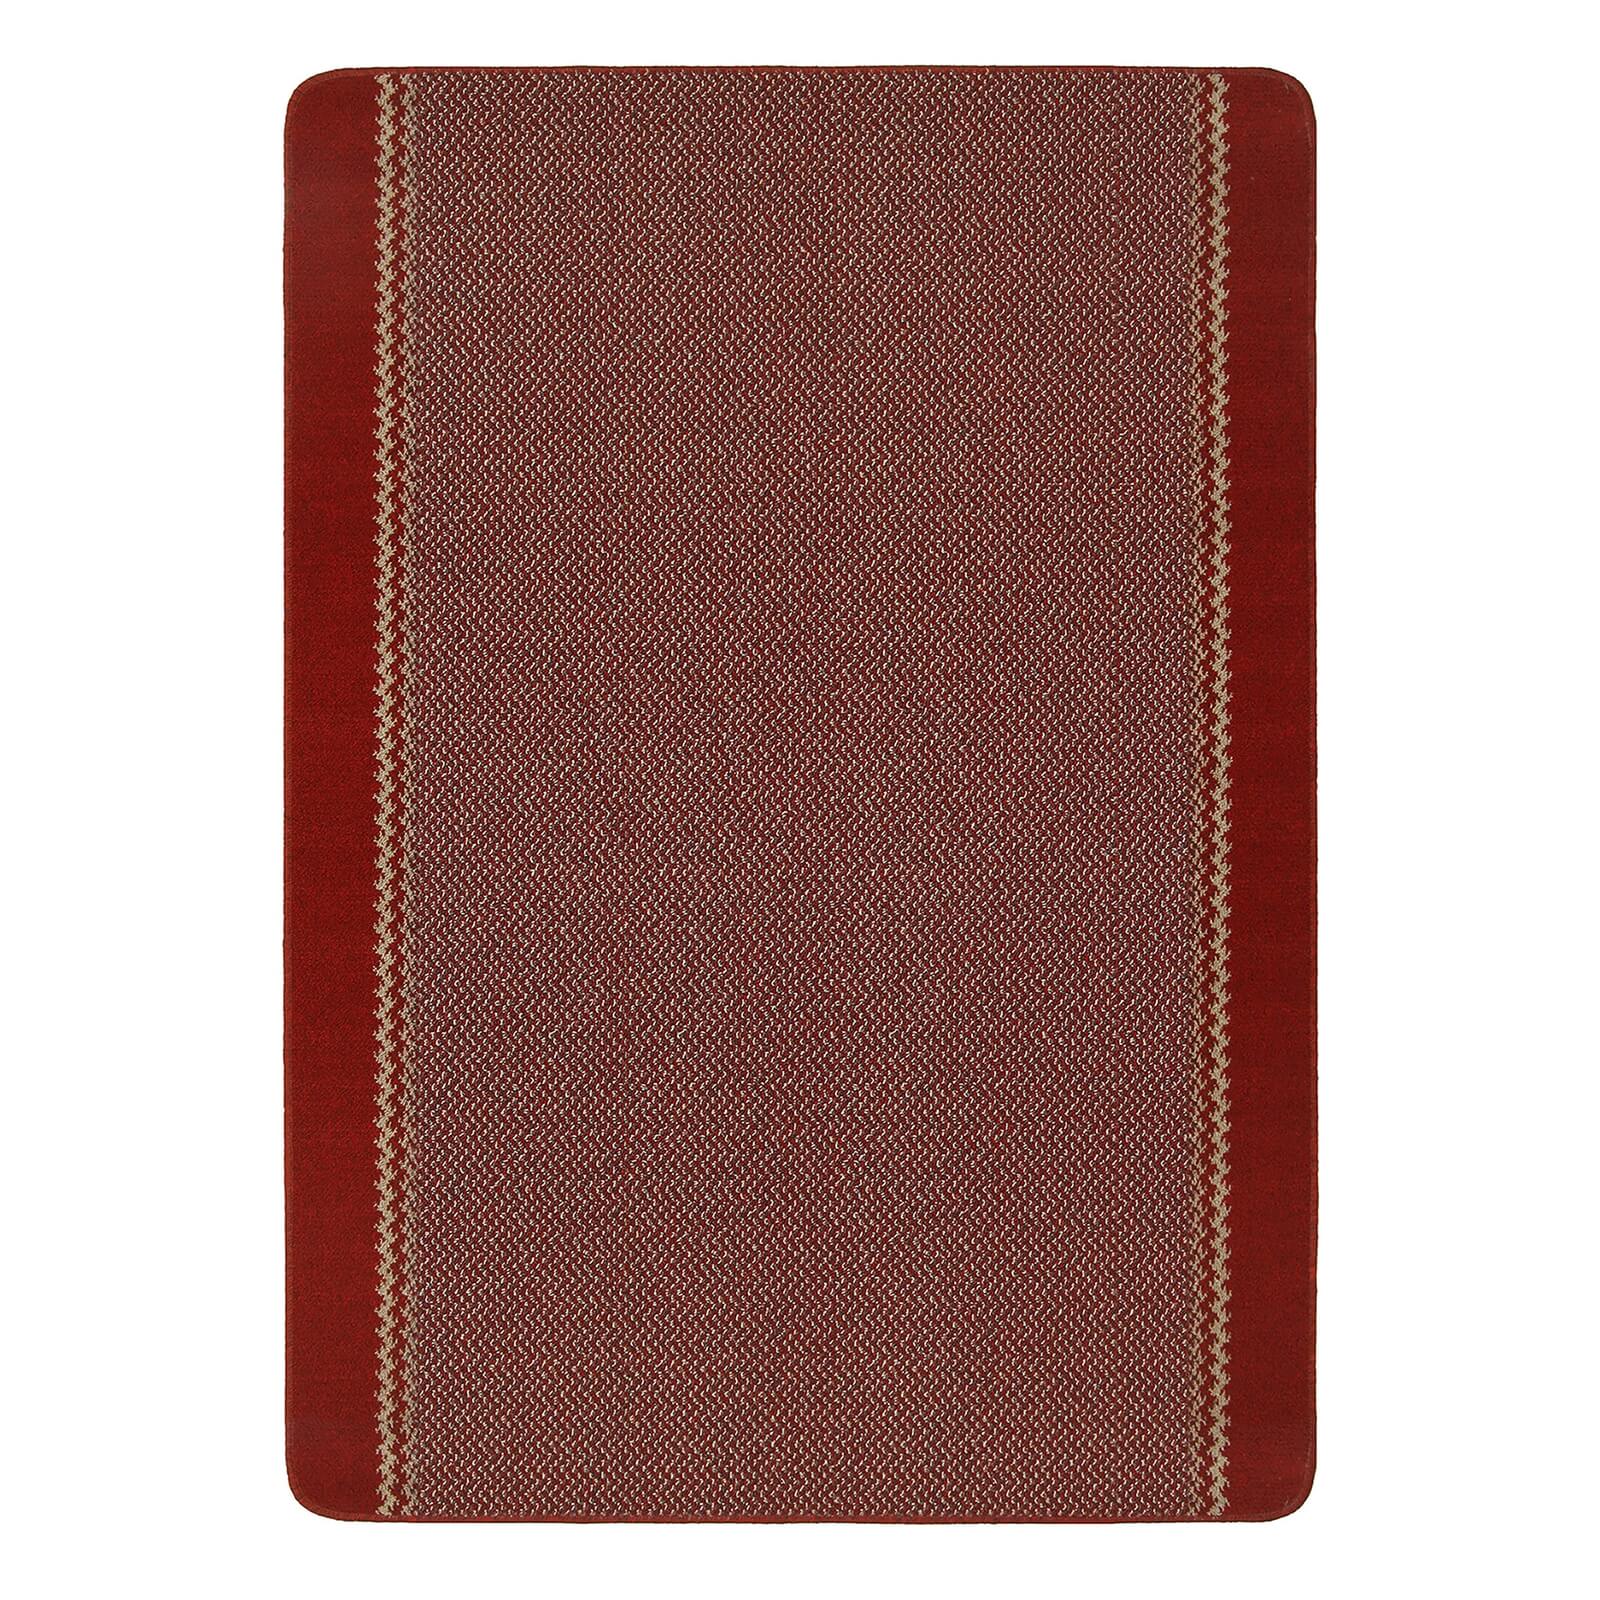 Richmond washable mat -Red